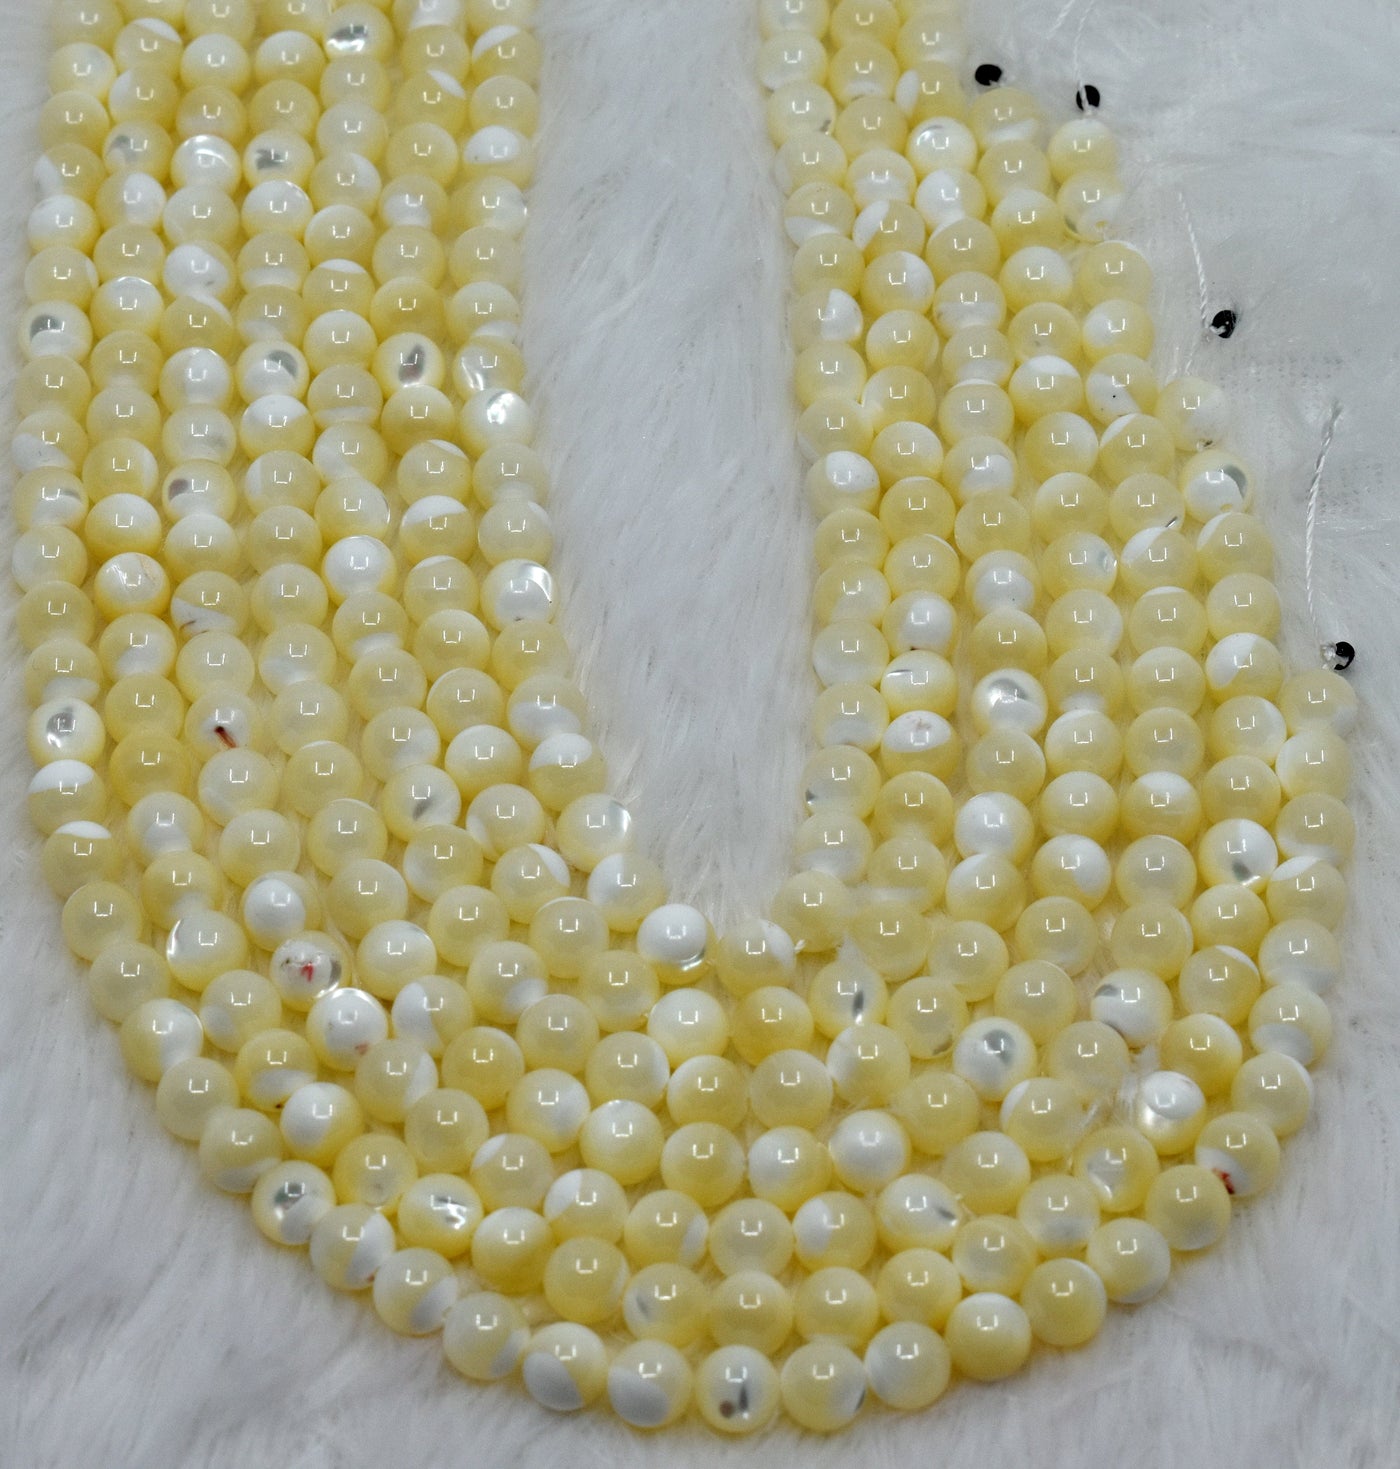 MOP Star Beads, Natural Round Crystal Beads 4mm to 12mm